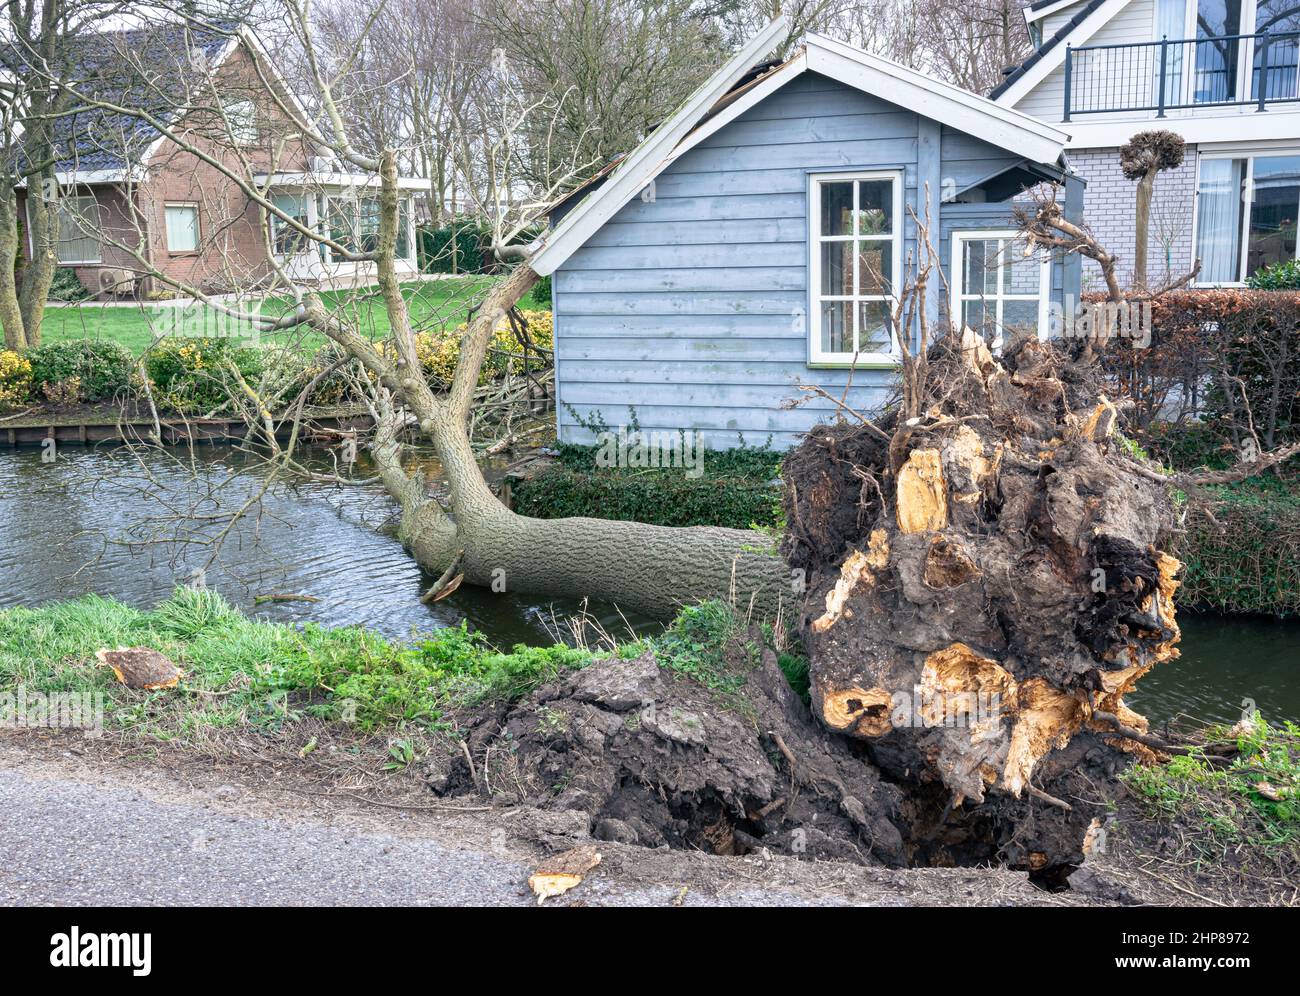 A tree has been uprooted during a severe storm and fallen into the water Stock Photo